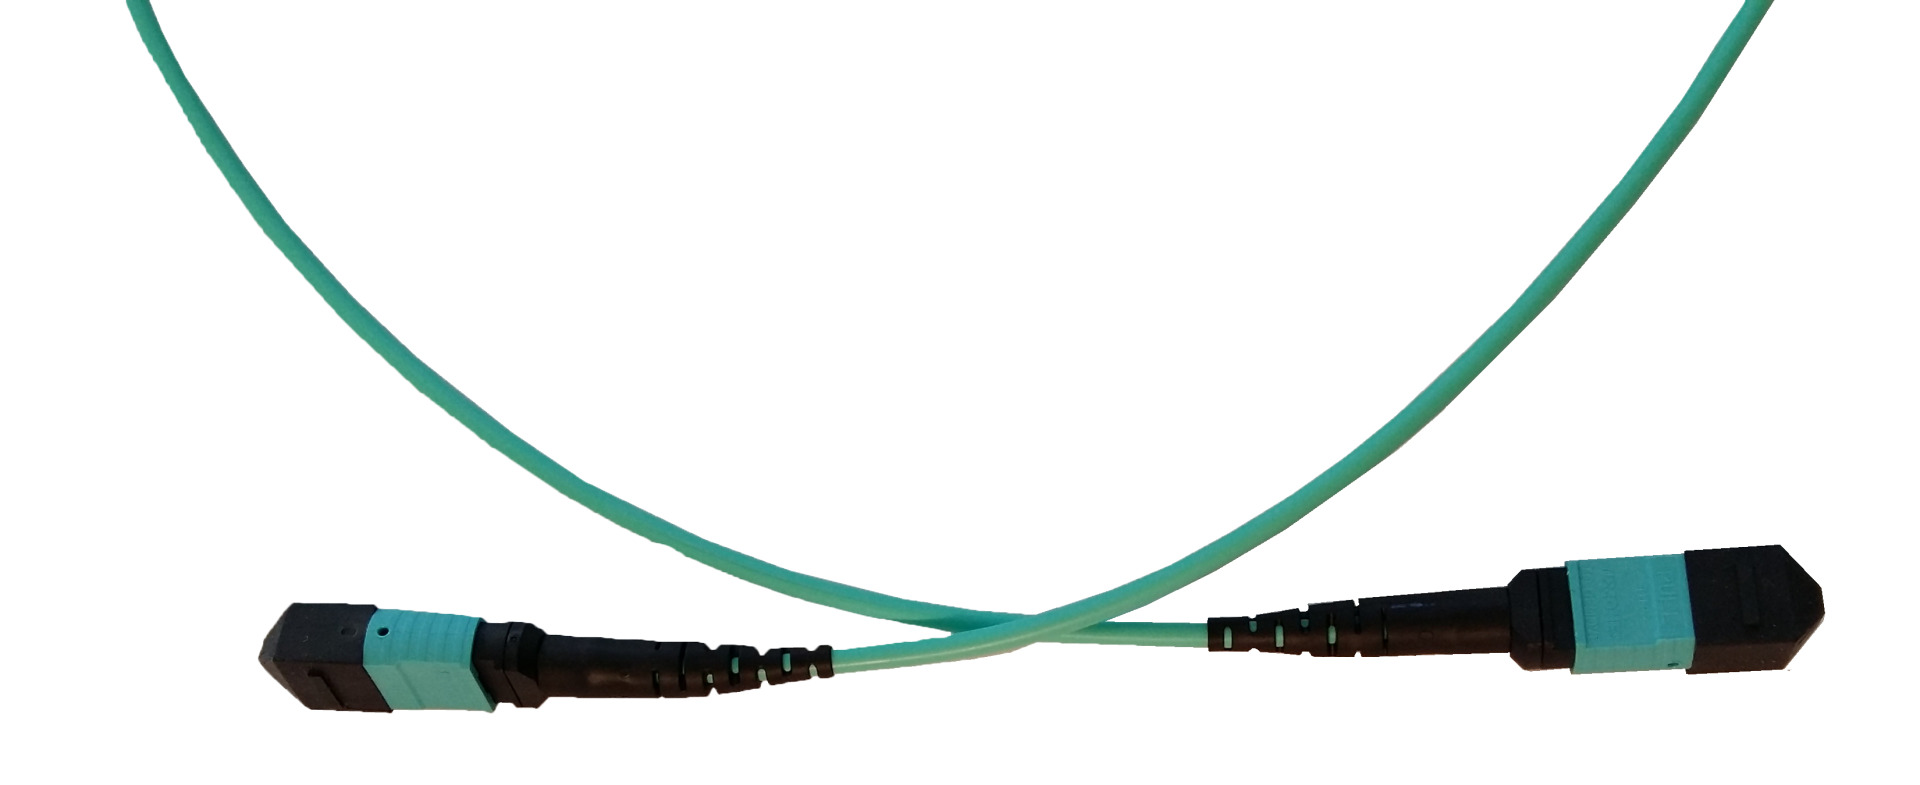 MTP/MPO Trunkcable 12 fiber MM OM3, 20m,Turquise, dobb.jacket OD=4,5mm